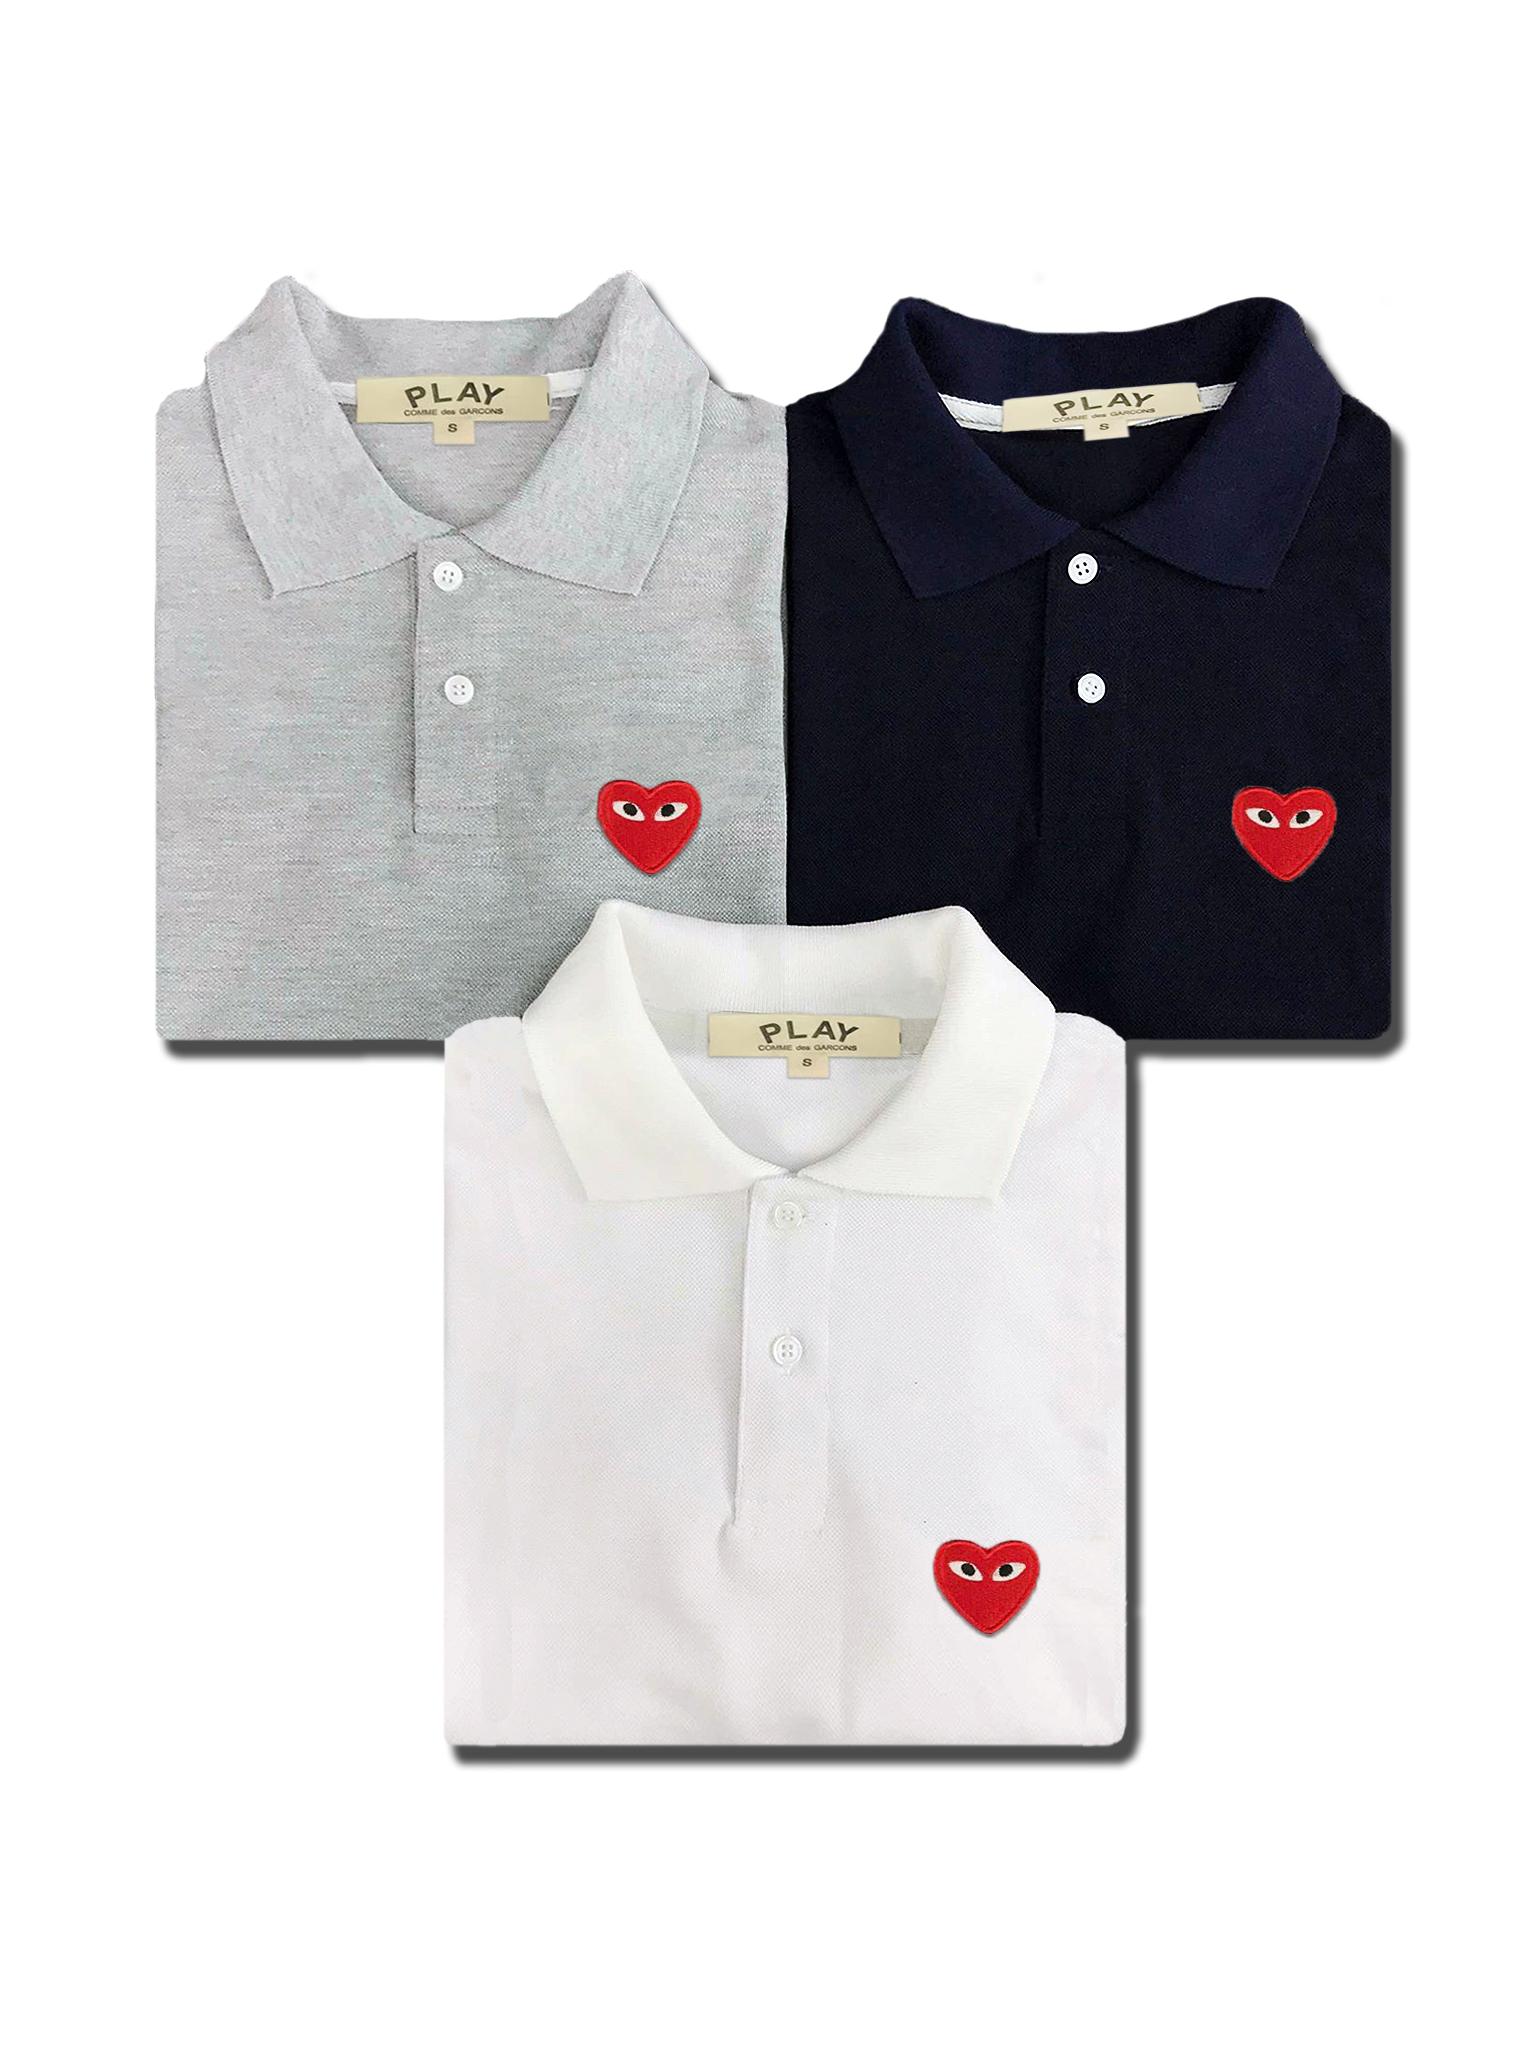 PLAY by Comme Des Garcons Polo Shirt Trio (Red Heart Logo).